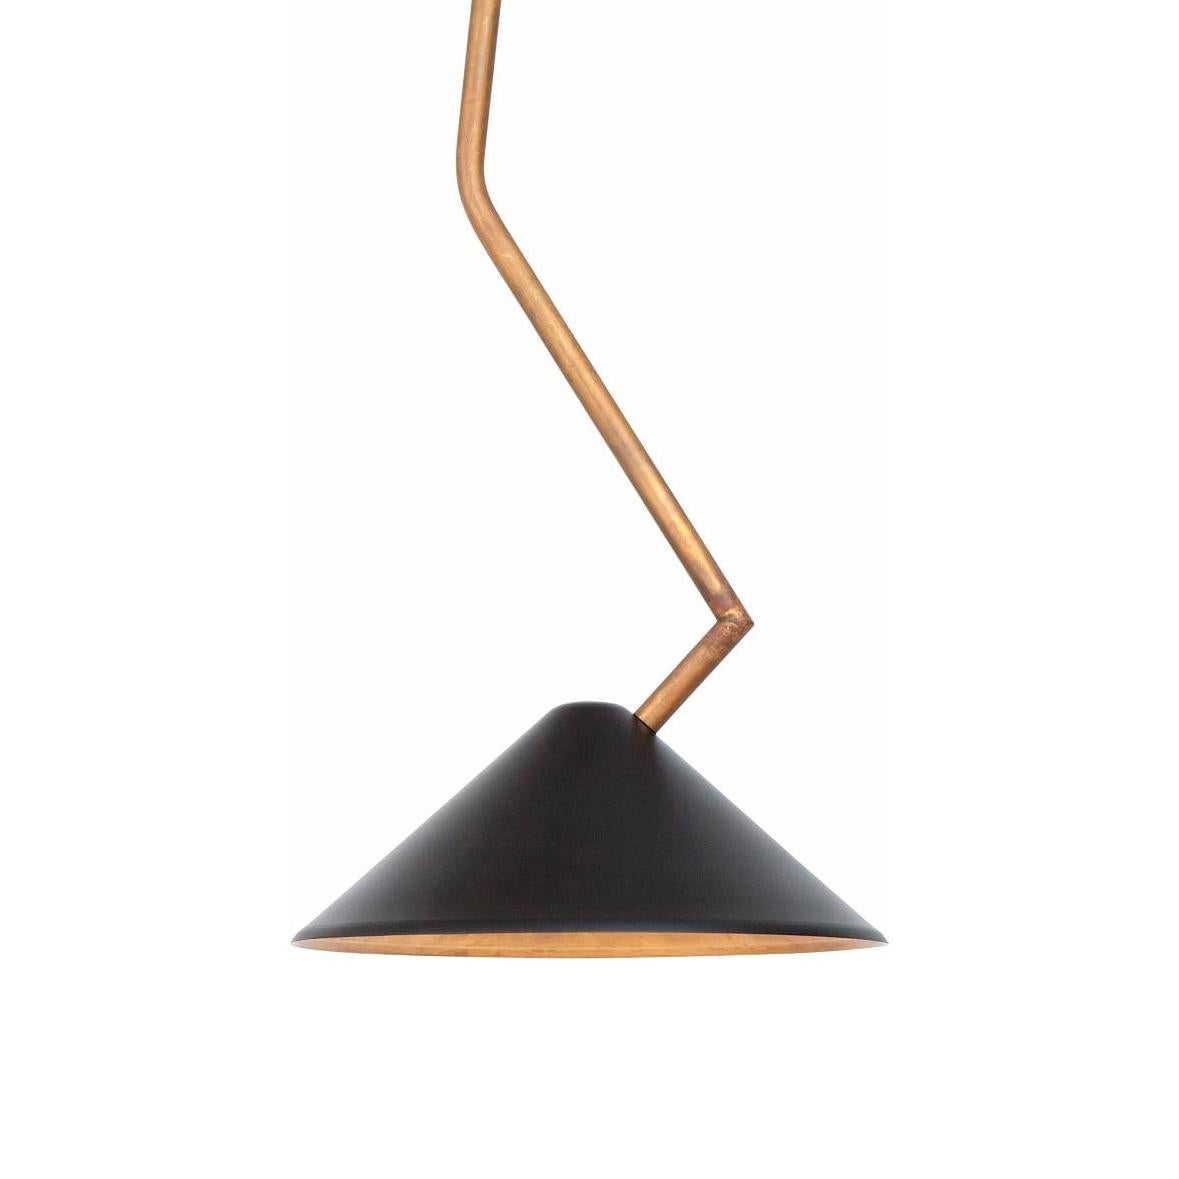 Ceiling lamp designed by Johan Carpner manufactured by Konsthantverk Tyringe in Sweden.

Grenverk ceiling
Measures: D 300 mm
H 750 mm
LED 5 W dimmable
Ceiling cup, hook mounted
3427-7 raw brass/black (one)

This lamp is wired for Europe, if